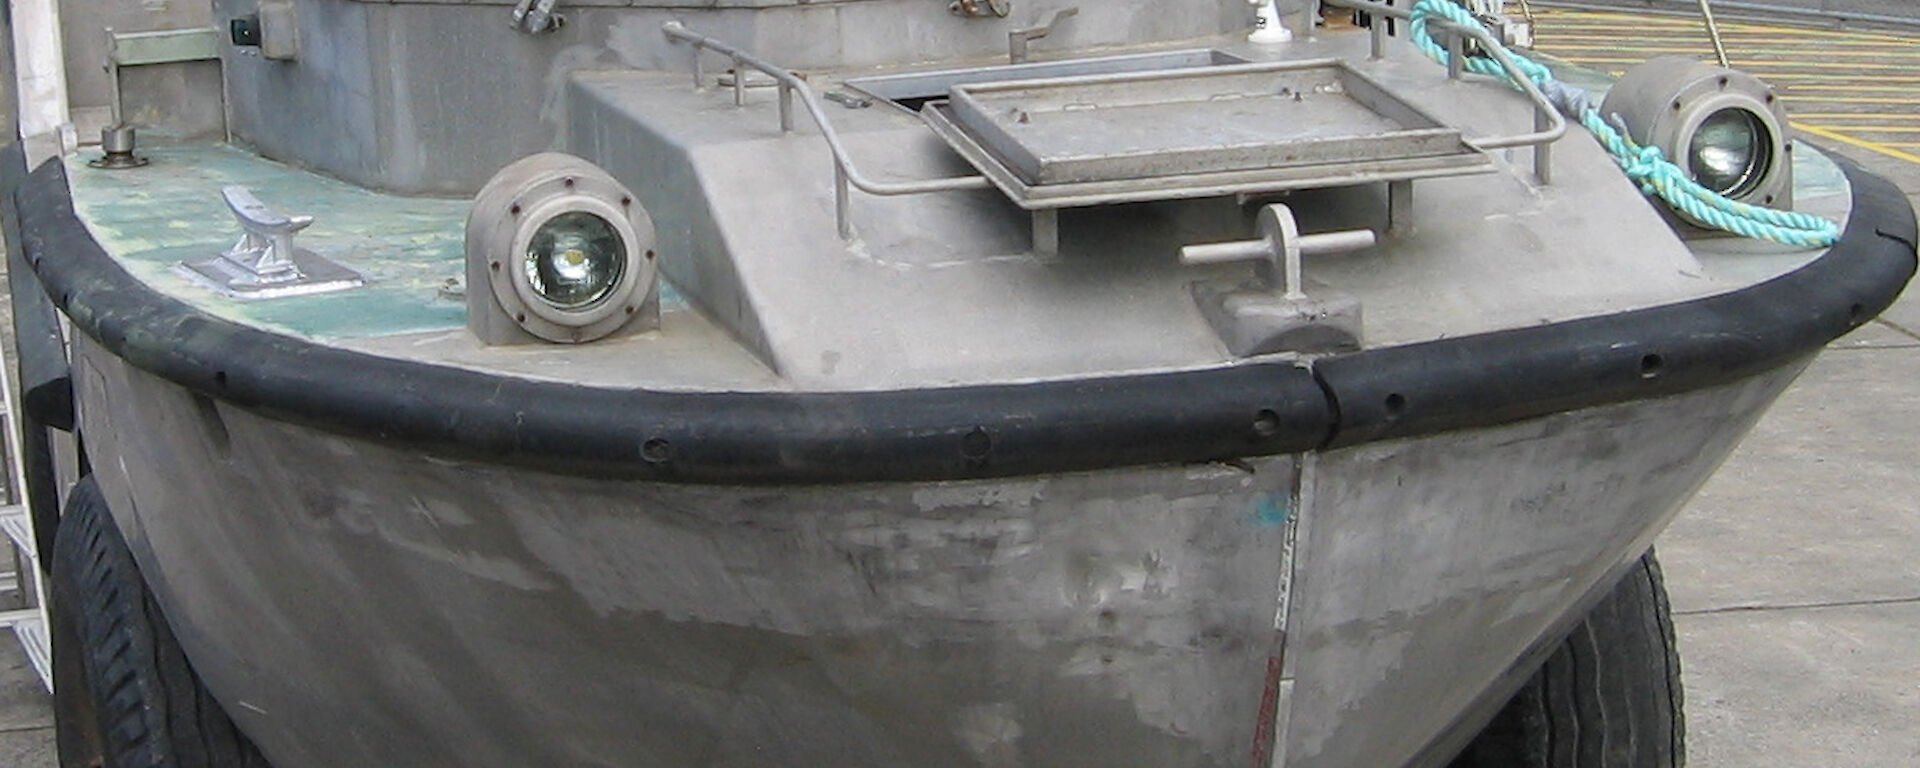 Front view of Lighter Amphibious Resupply Cargo vehicle